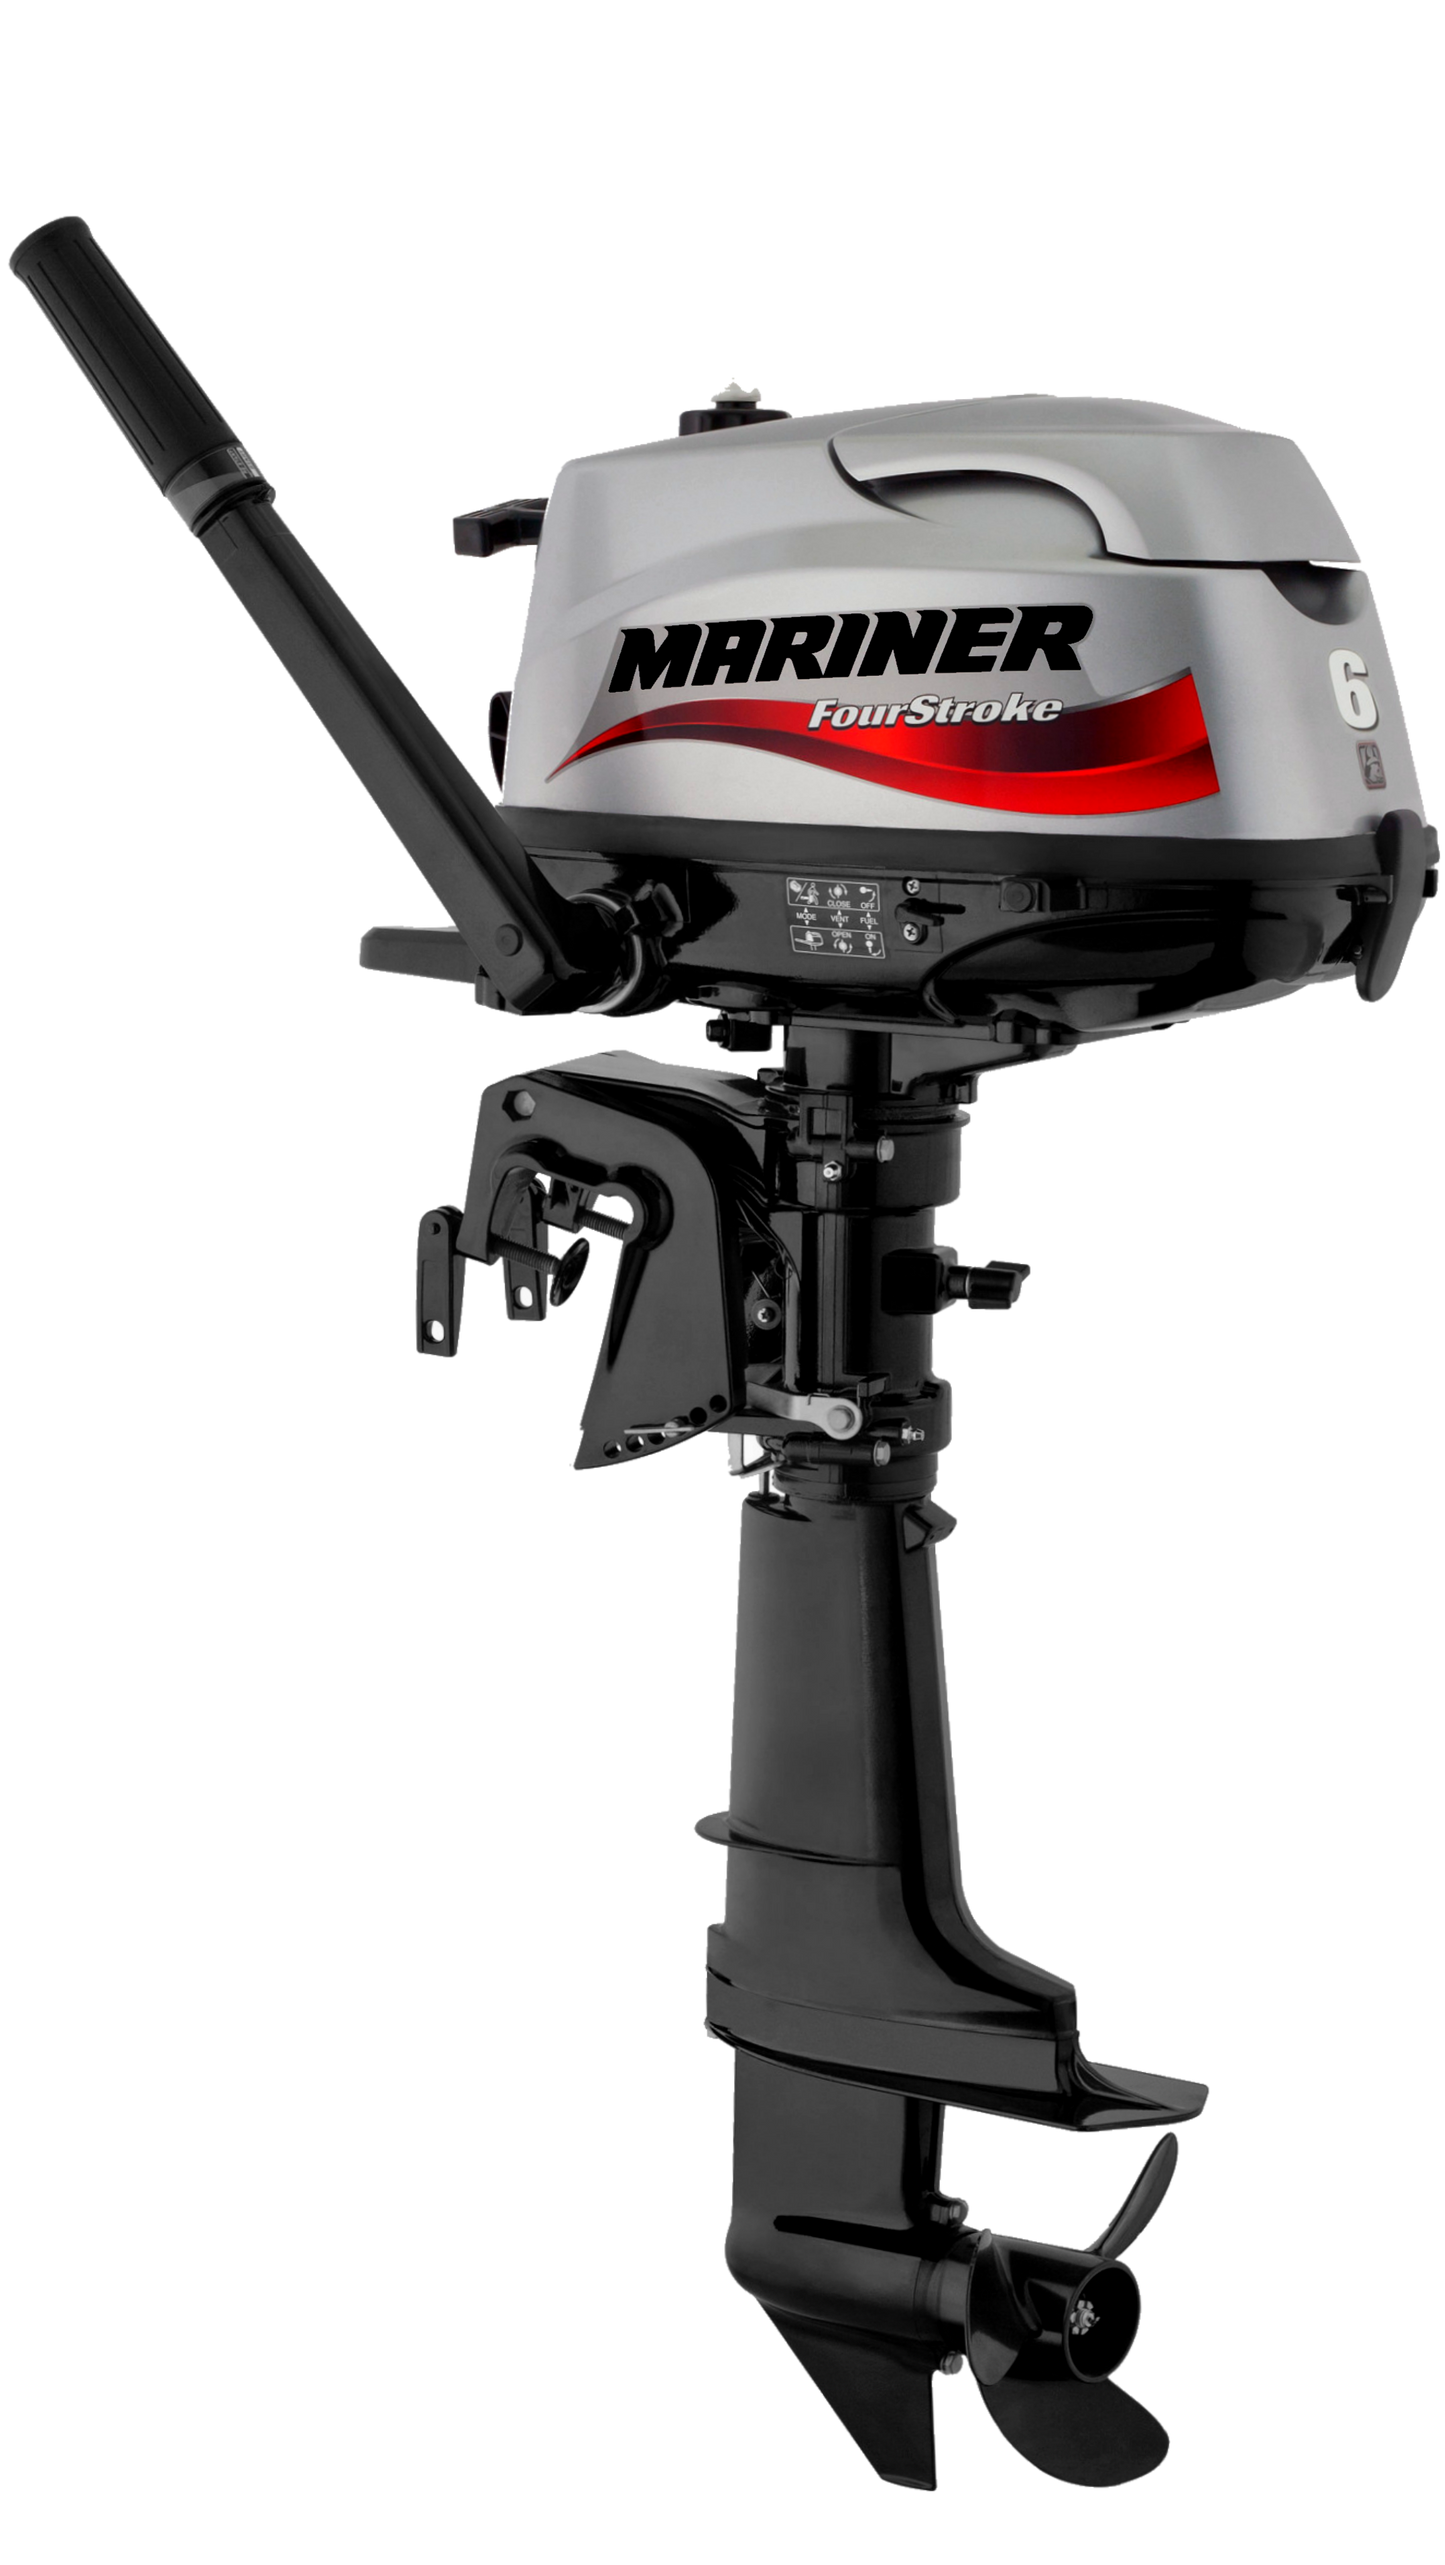 Mariner Four Stroke 6hp Outboard